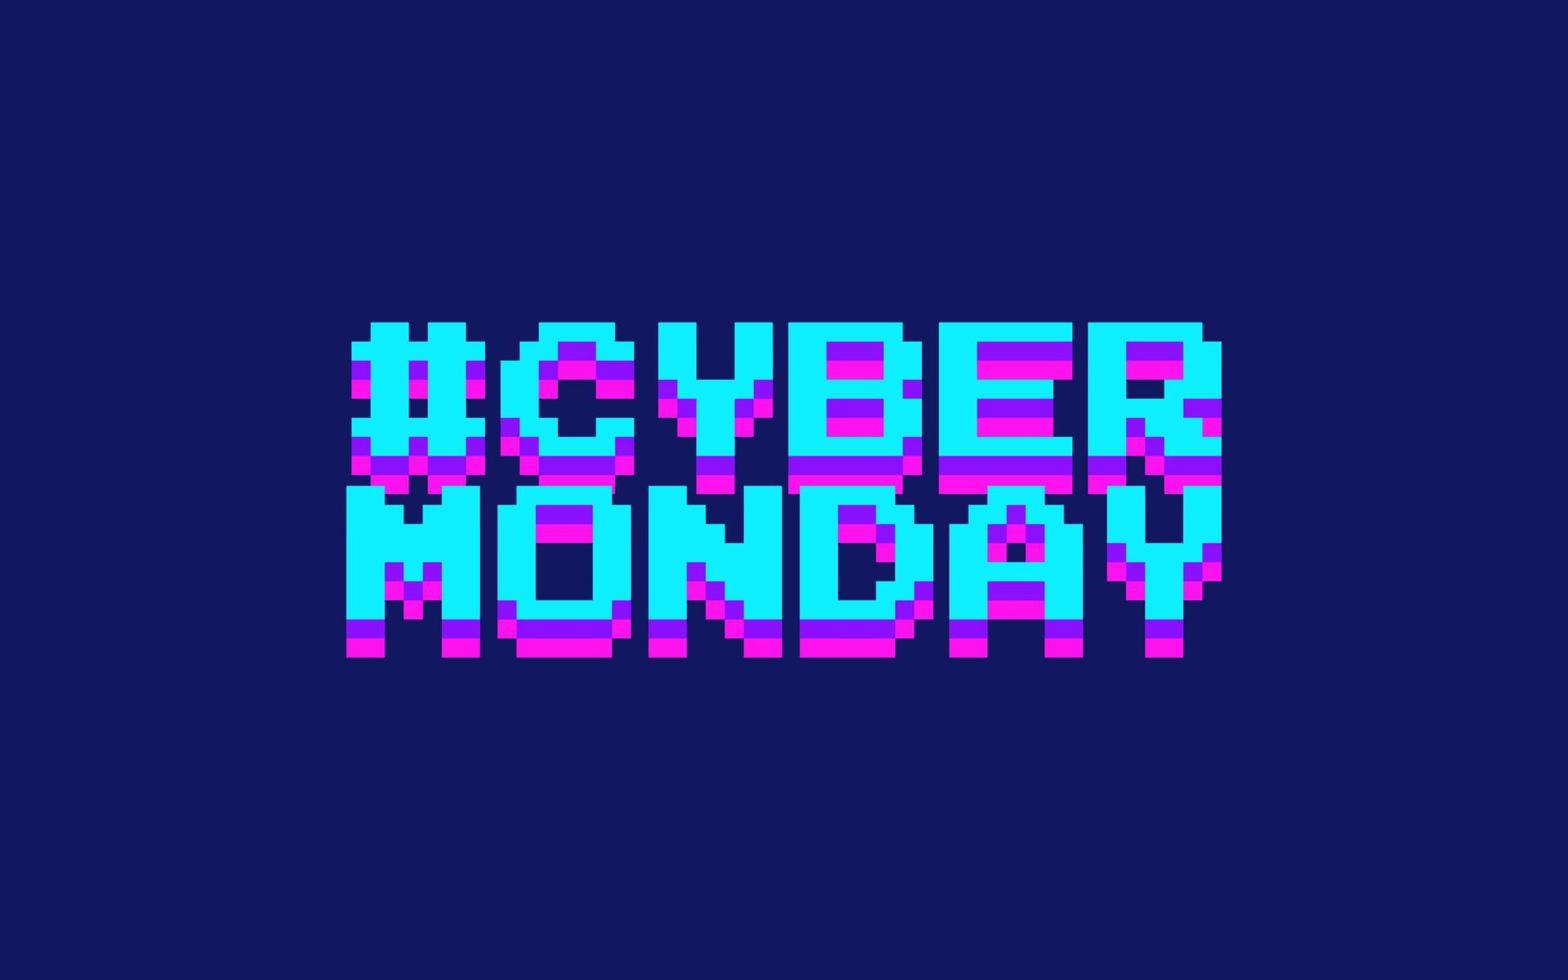 Cyber Monday Pixel Art Banner, Isolated on Navy Blue Background. Editable vector eps.